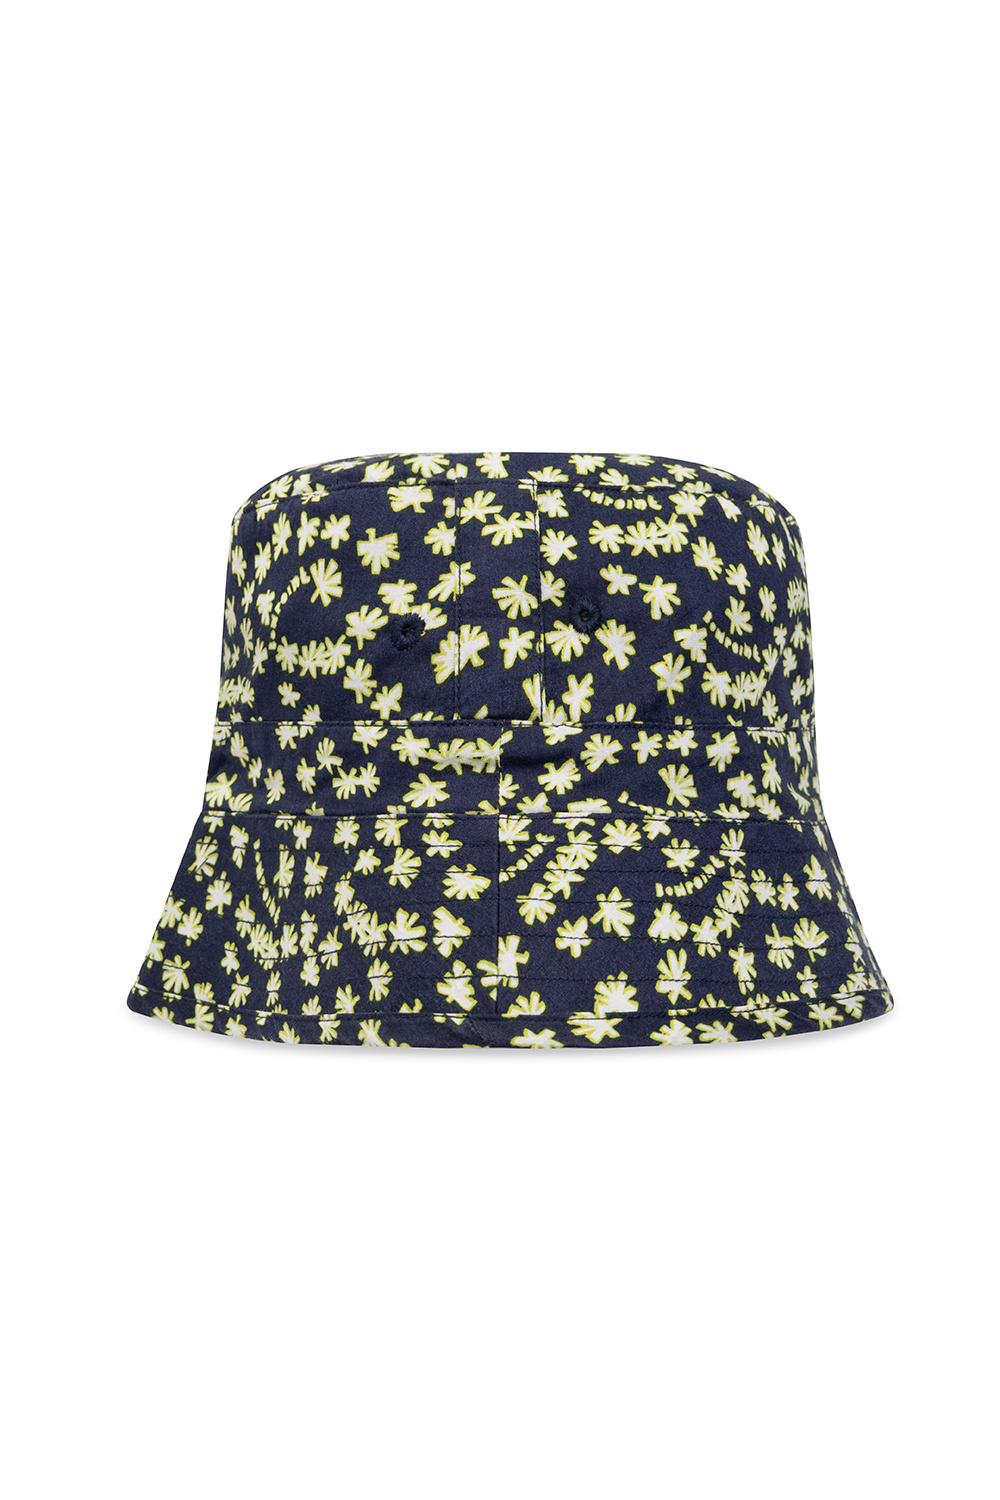 Bonpoint  Bucket hat bucket with floral motif